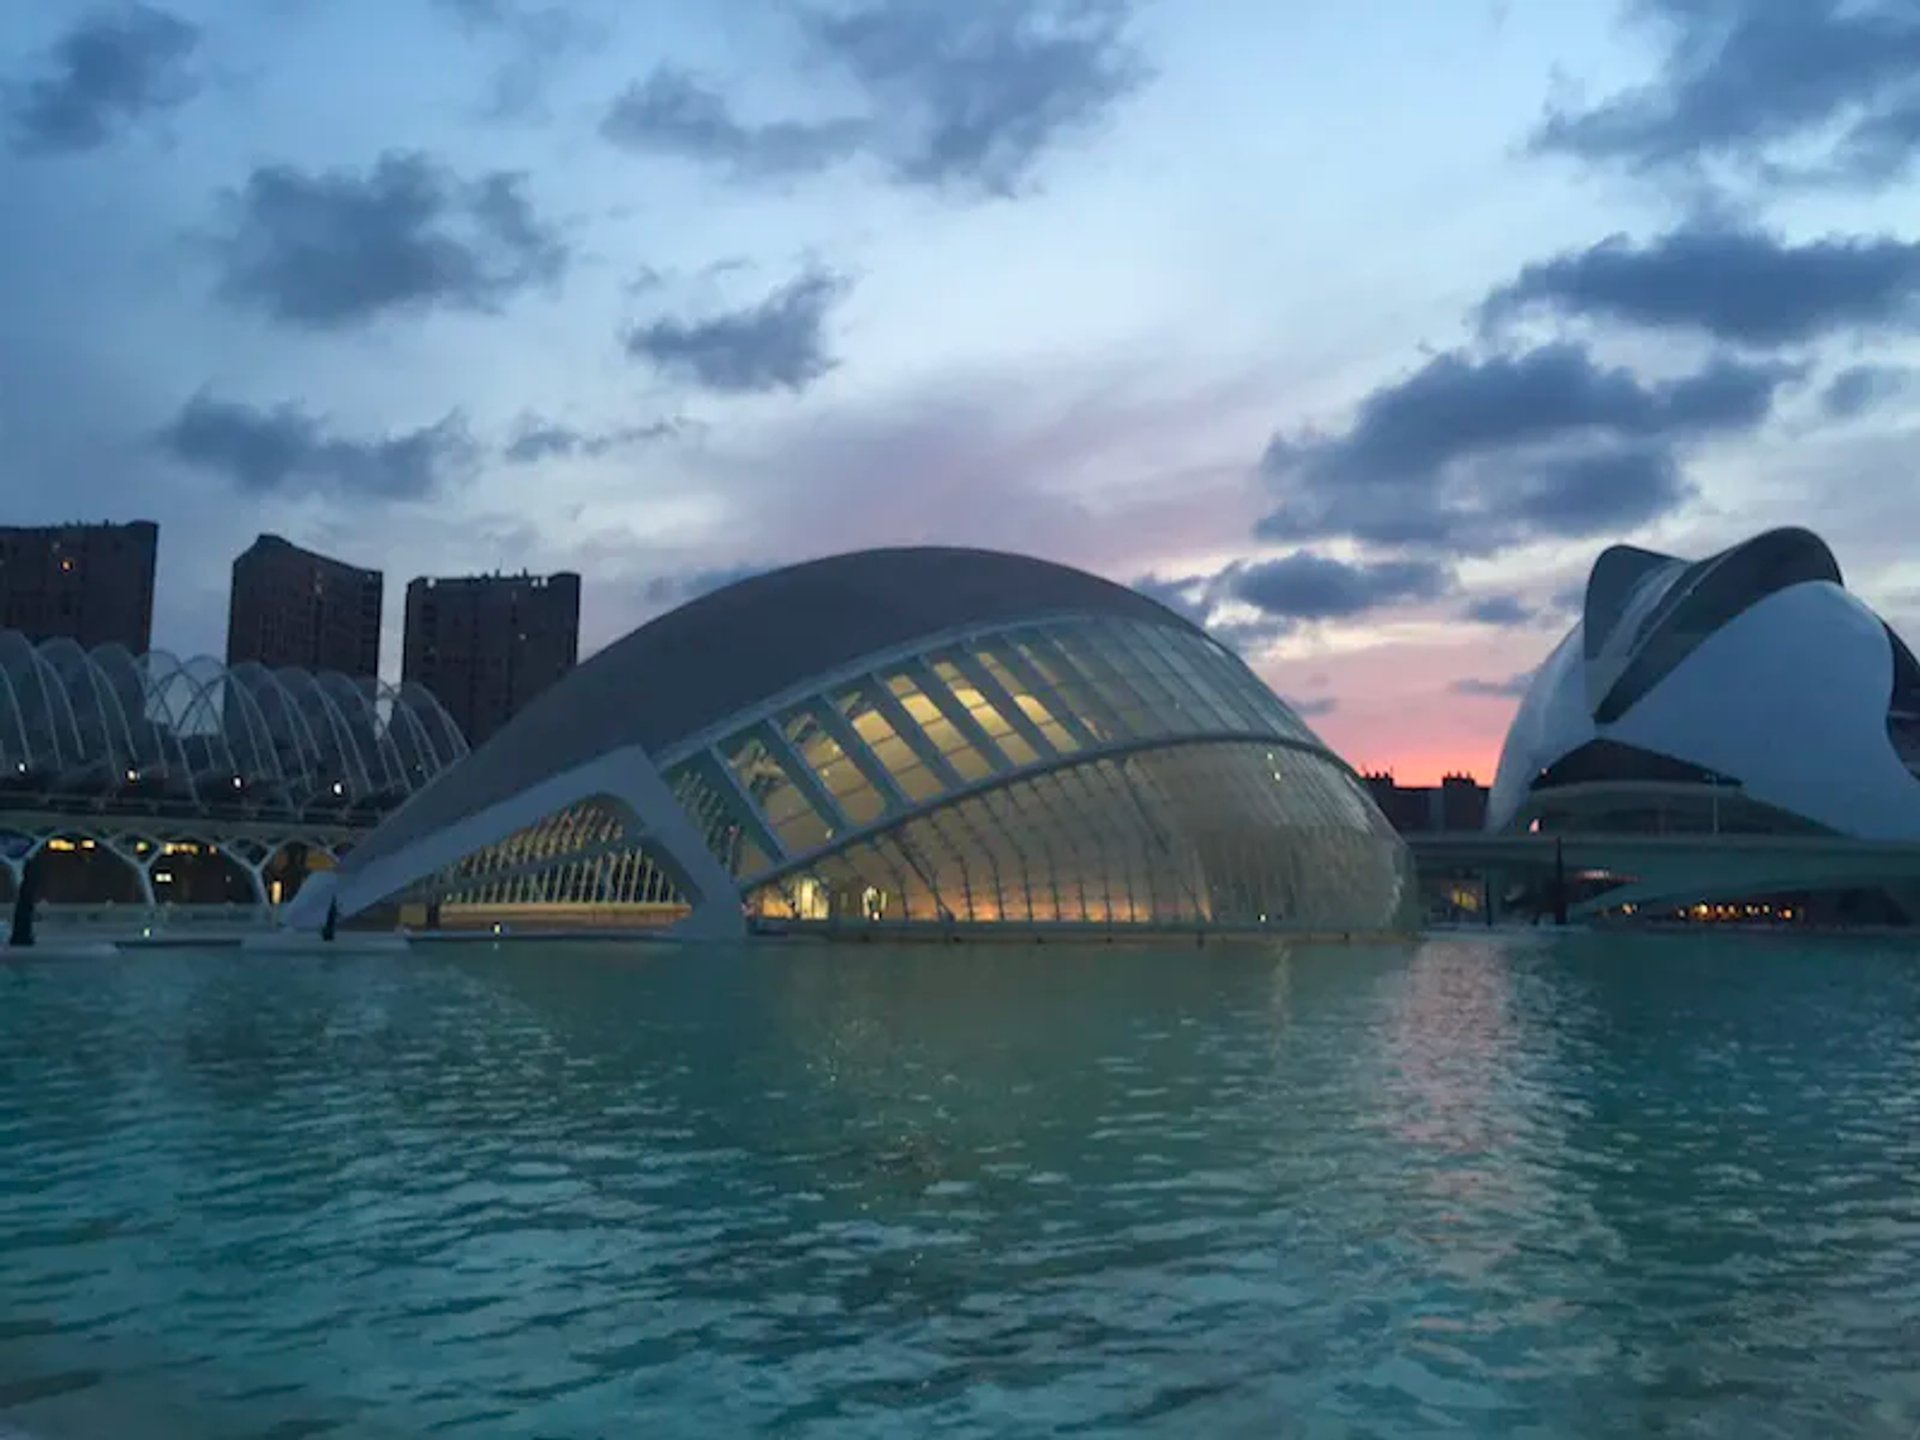 Valencia museum of science